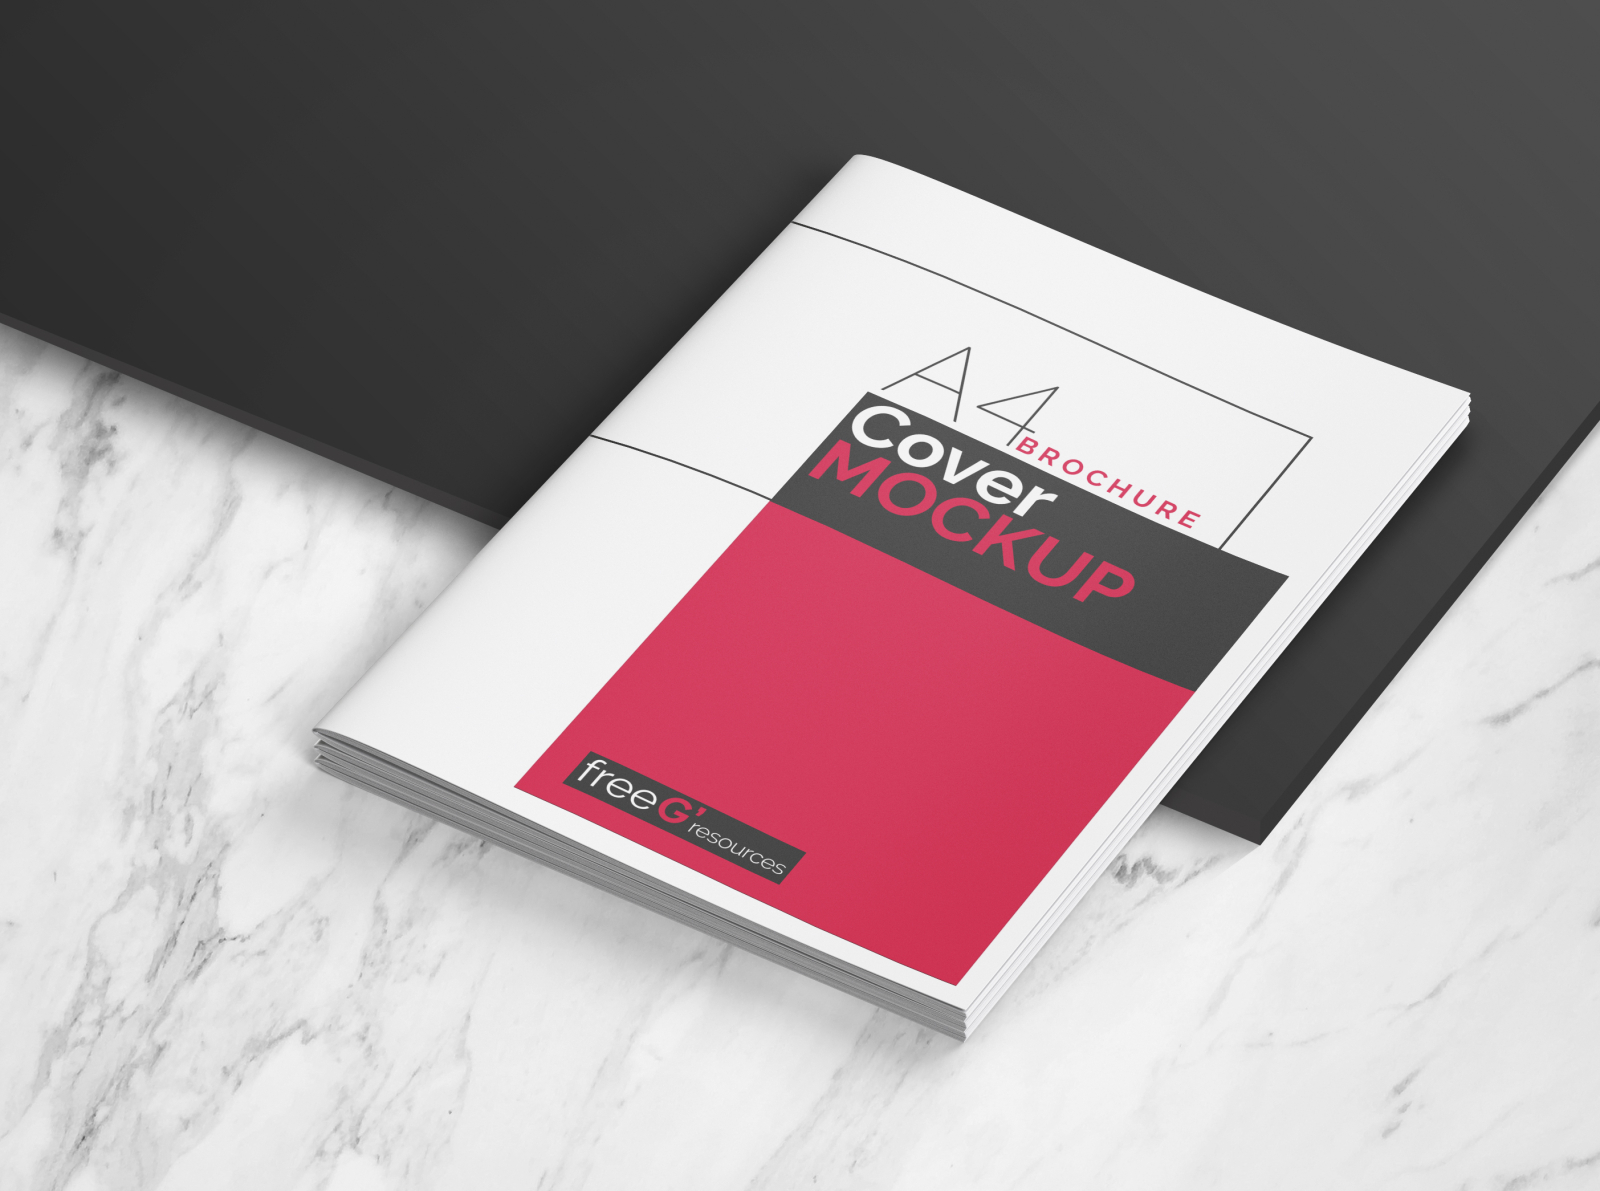  A4  Brochure Mockup  free Download by freeG resources on 